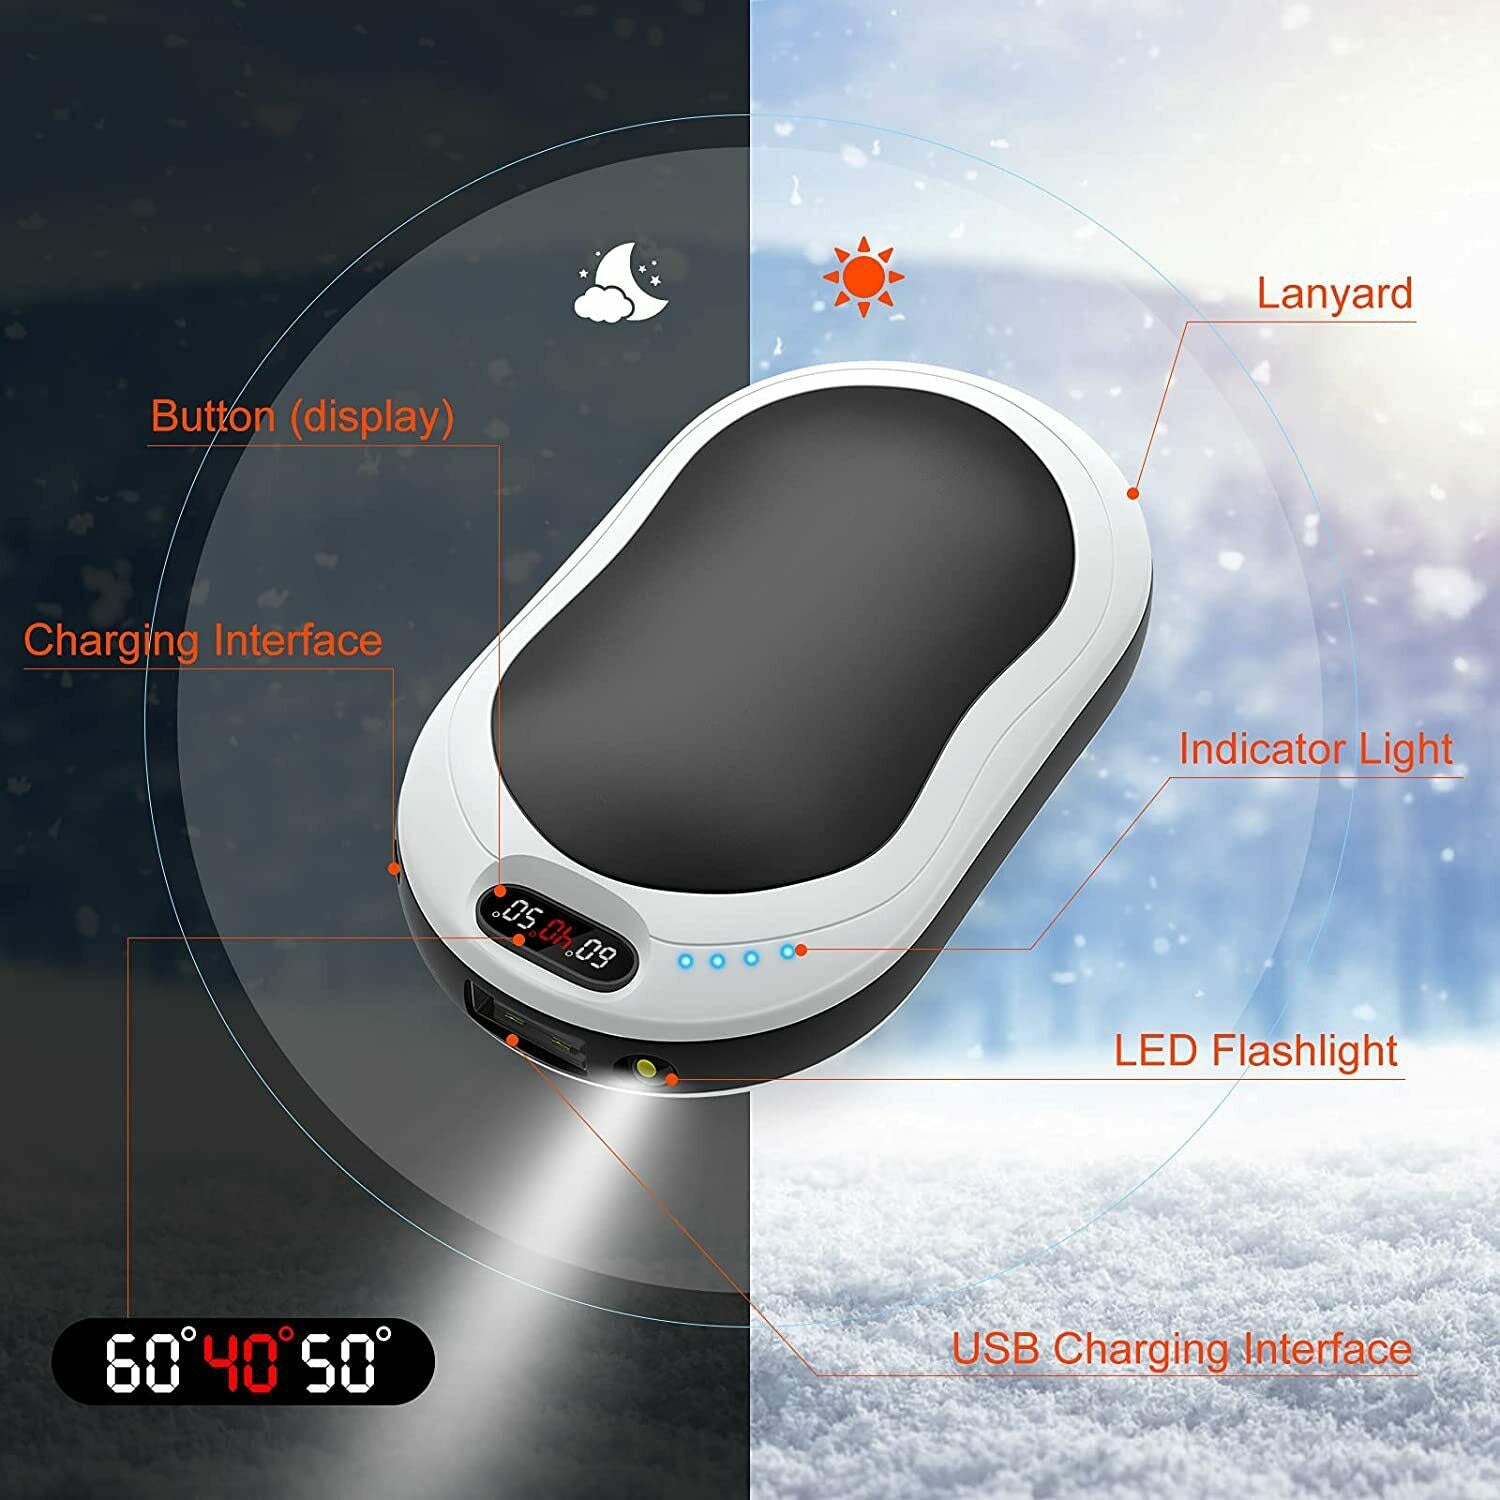 Electric Hot Rechargeable Hand Warmers - Reusable USB Hand Warmer 10000mAh Electric Portable Pocket Hand Warmers, Double-sided Heat